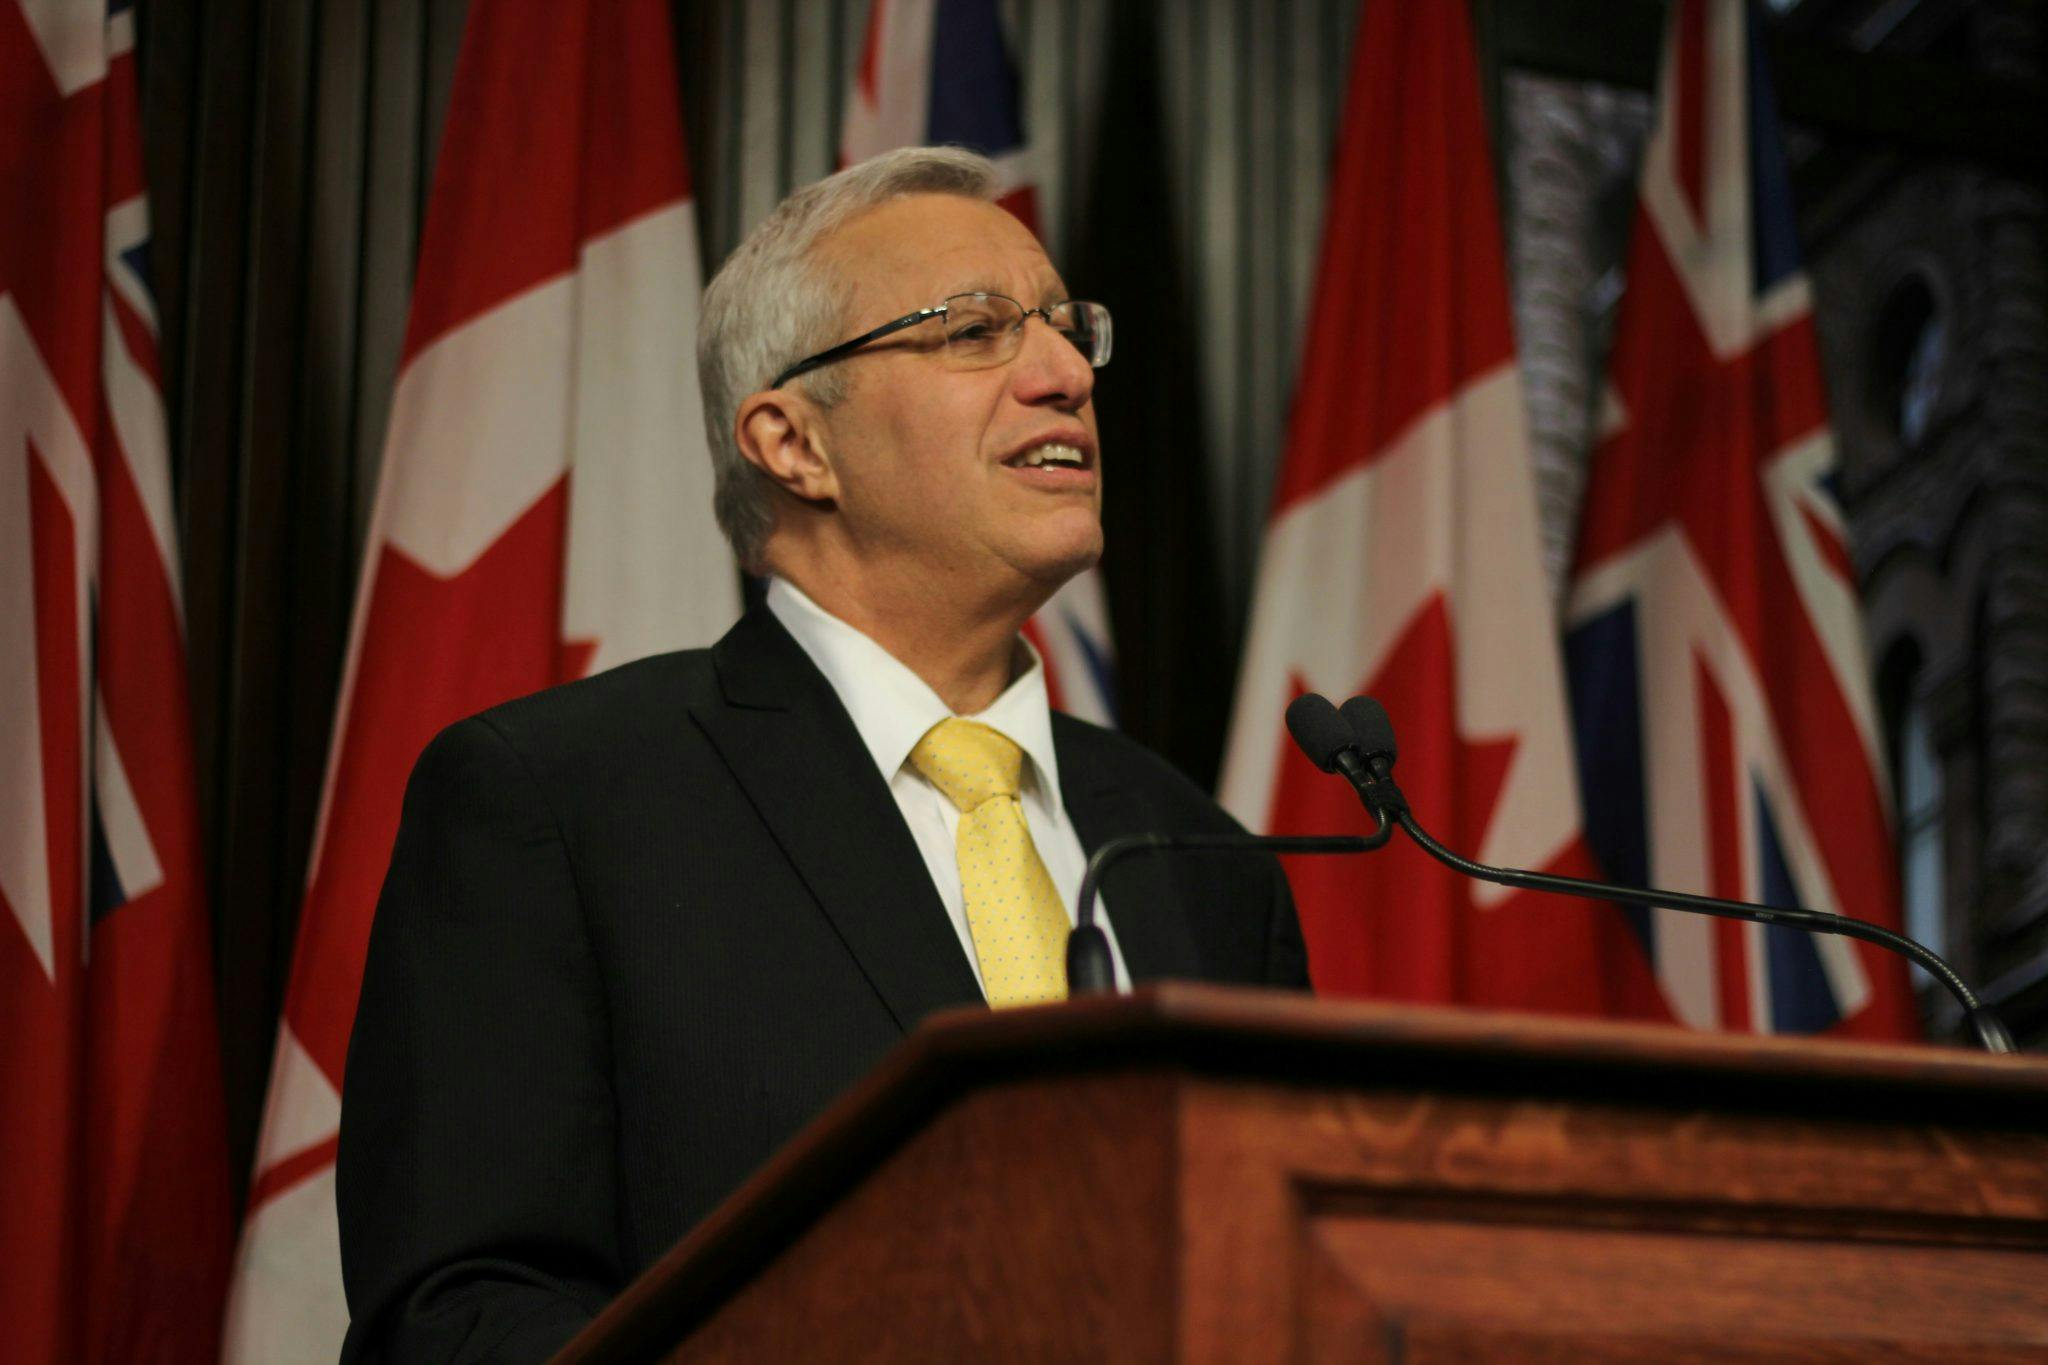 Vic Fedeli won’t run in PC leadership race, says the vote is set for March 24